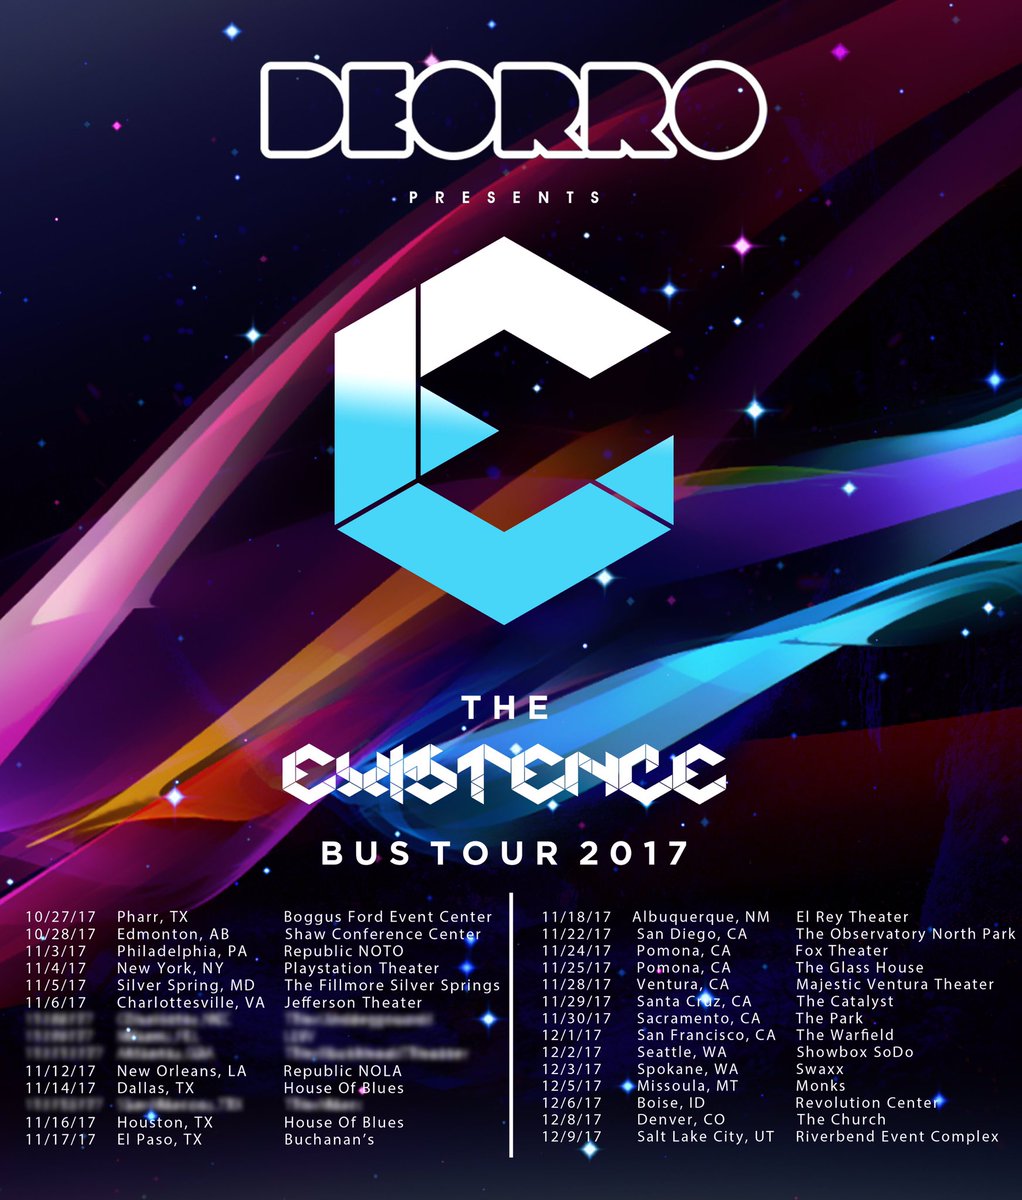 stoked to announce the existence bus tour tickets available now, link in bio https://t.co/tN3zZyqz5U